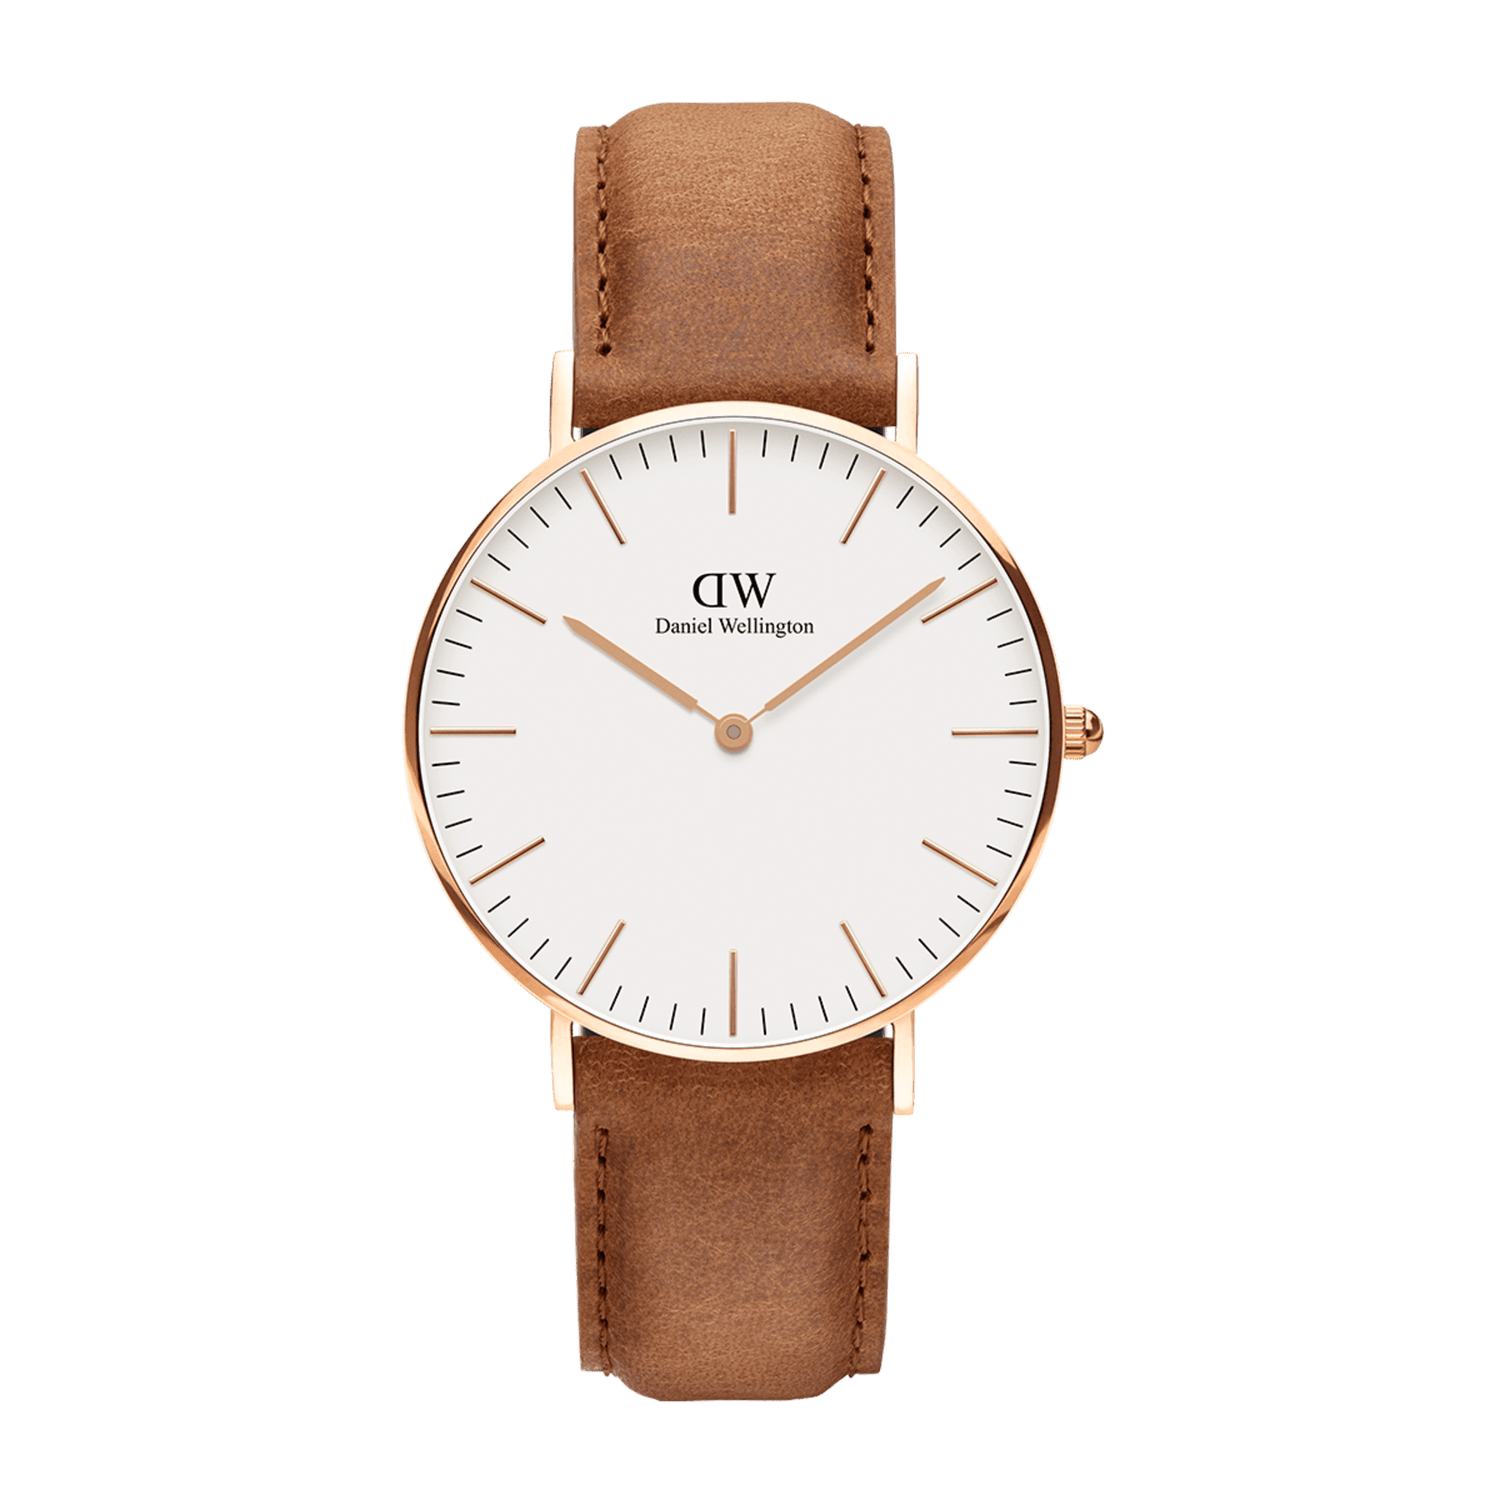 Durham - Men's rose gold watch with white dial 40 mm | DW – Daniel